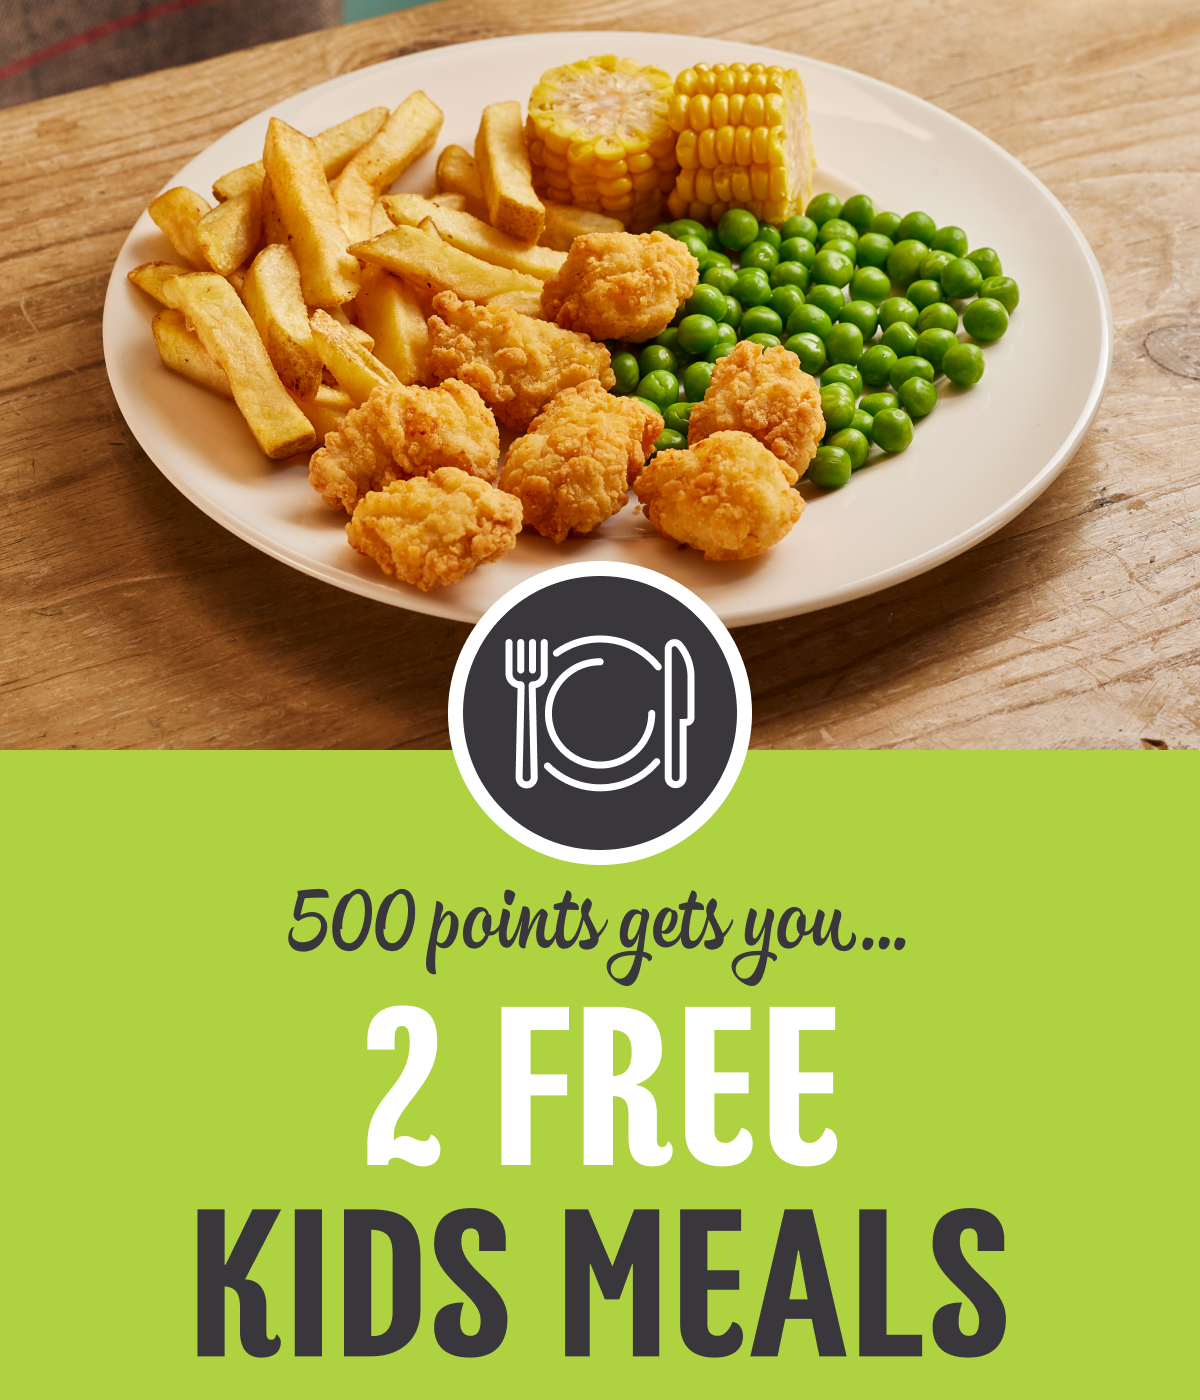 500 points gets you... 2 £ off your bill